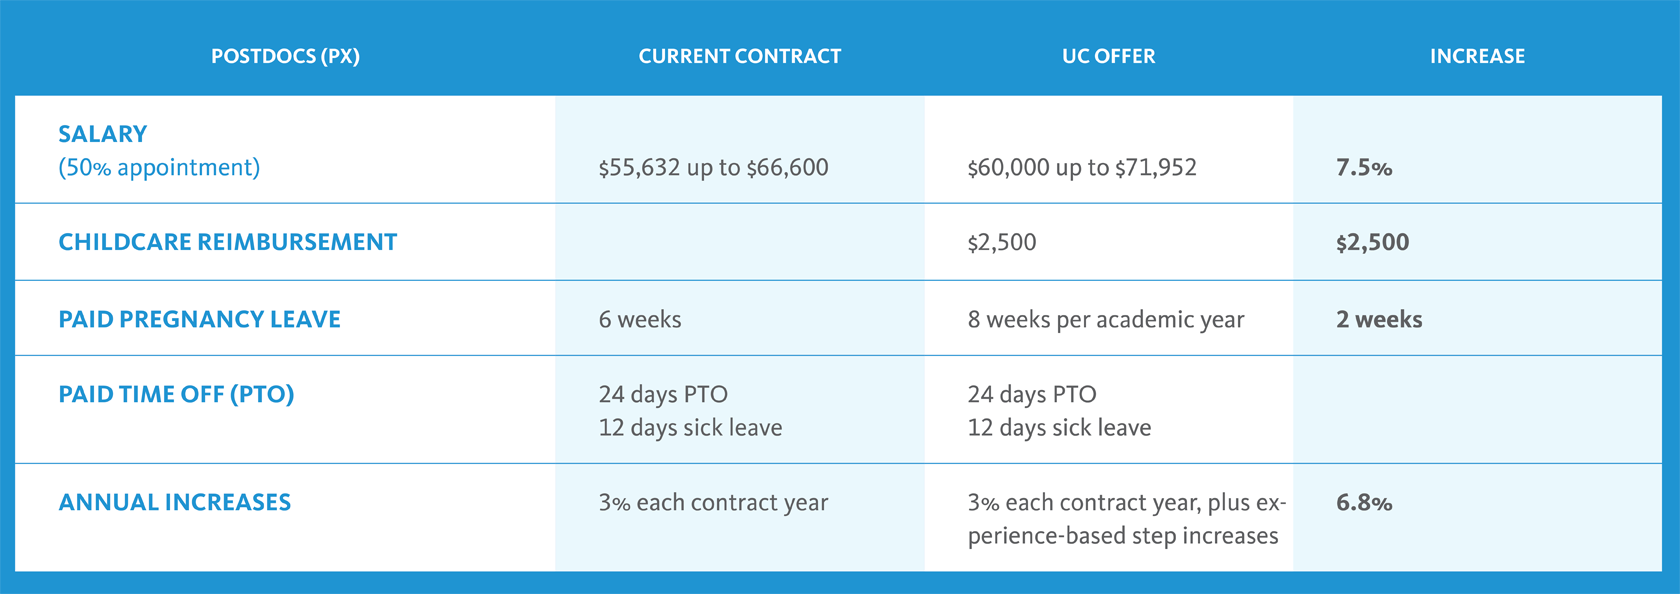 Chart showing current contract and the offer from UC for postdocs